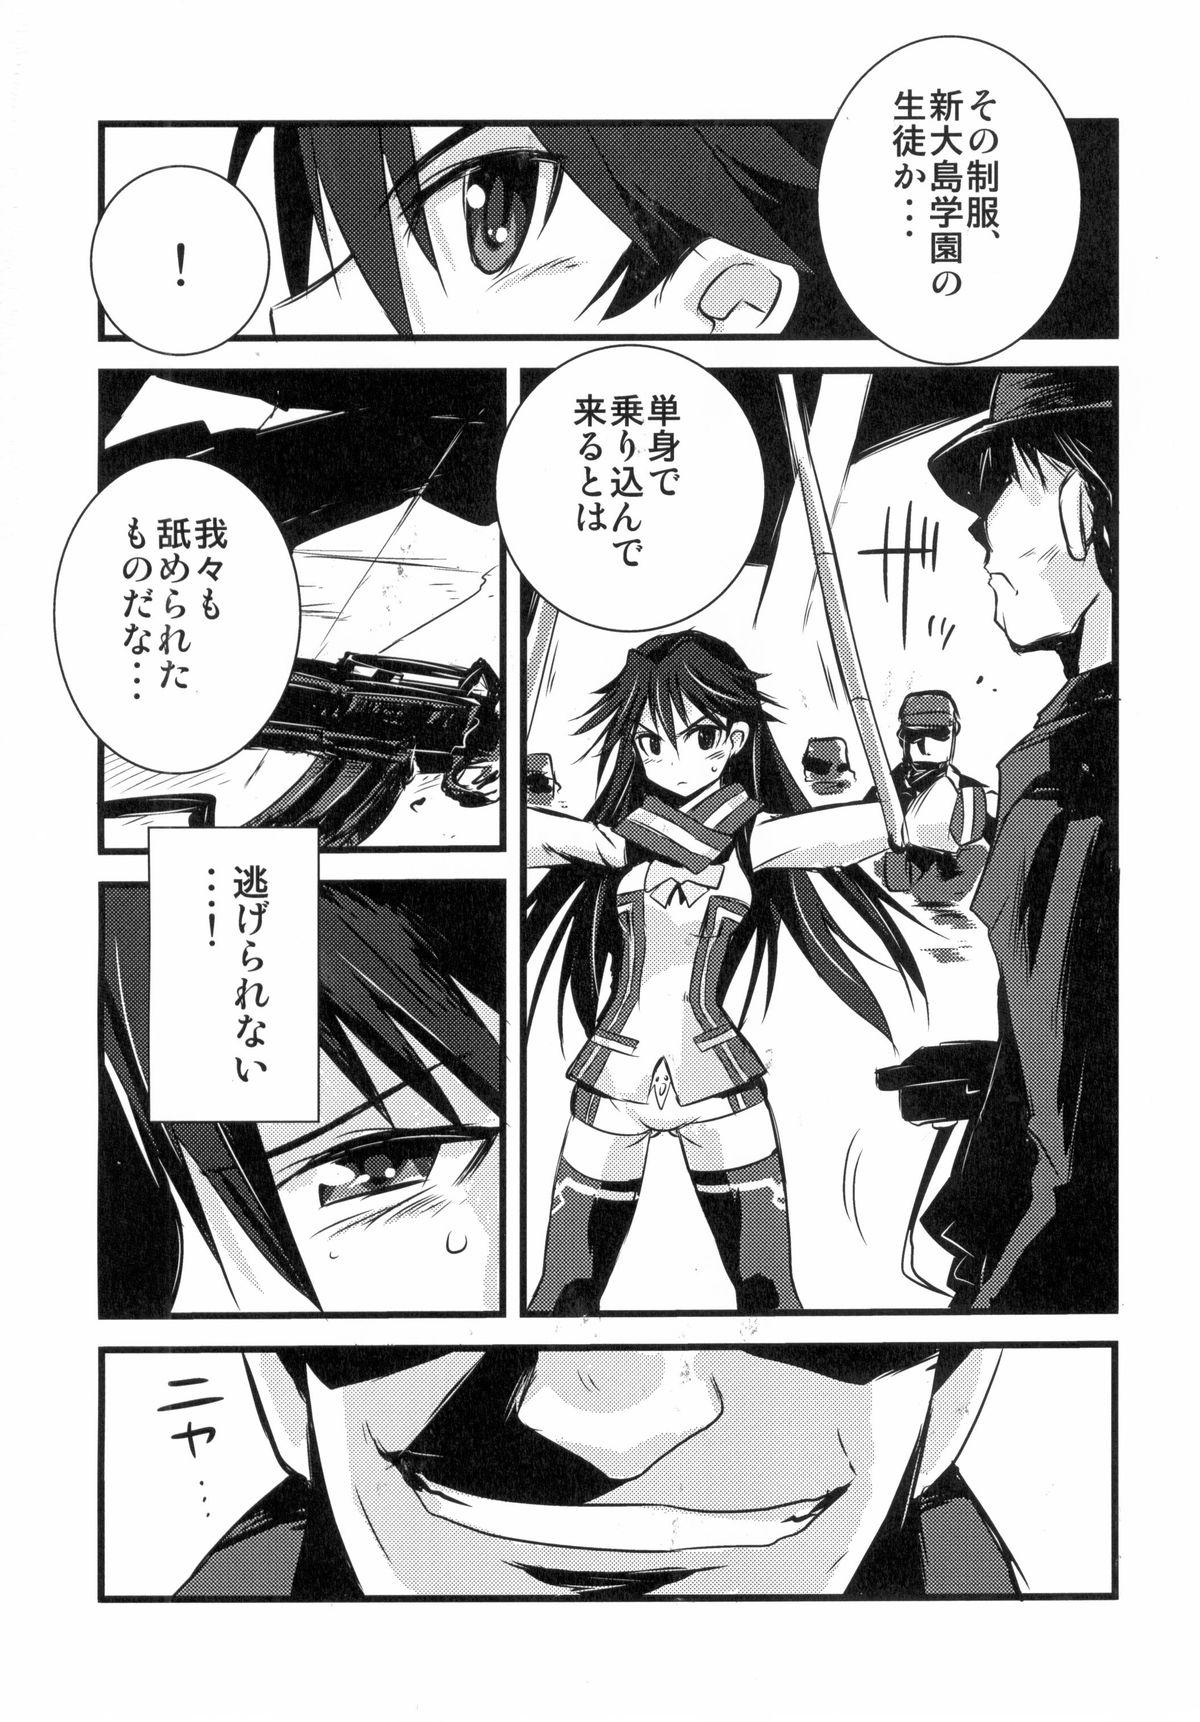 Legs operation 0 - Vividred operation Perfect Teen - Page 7